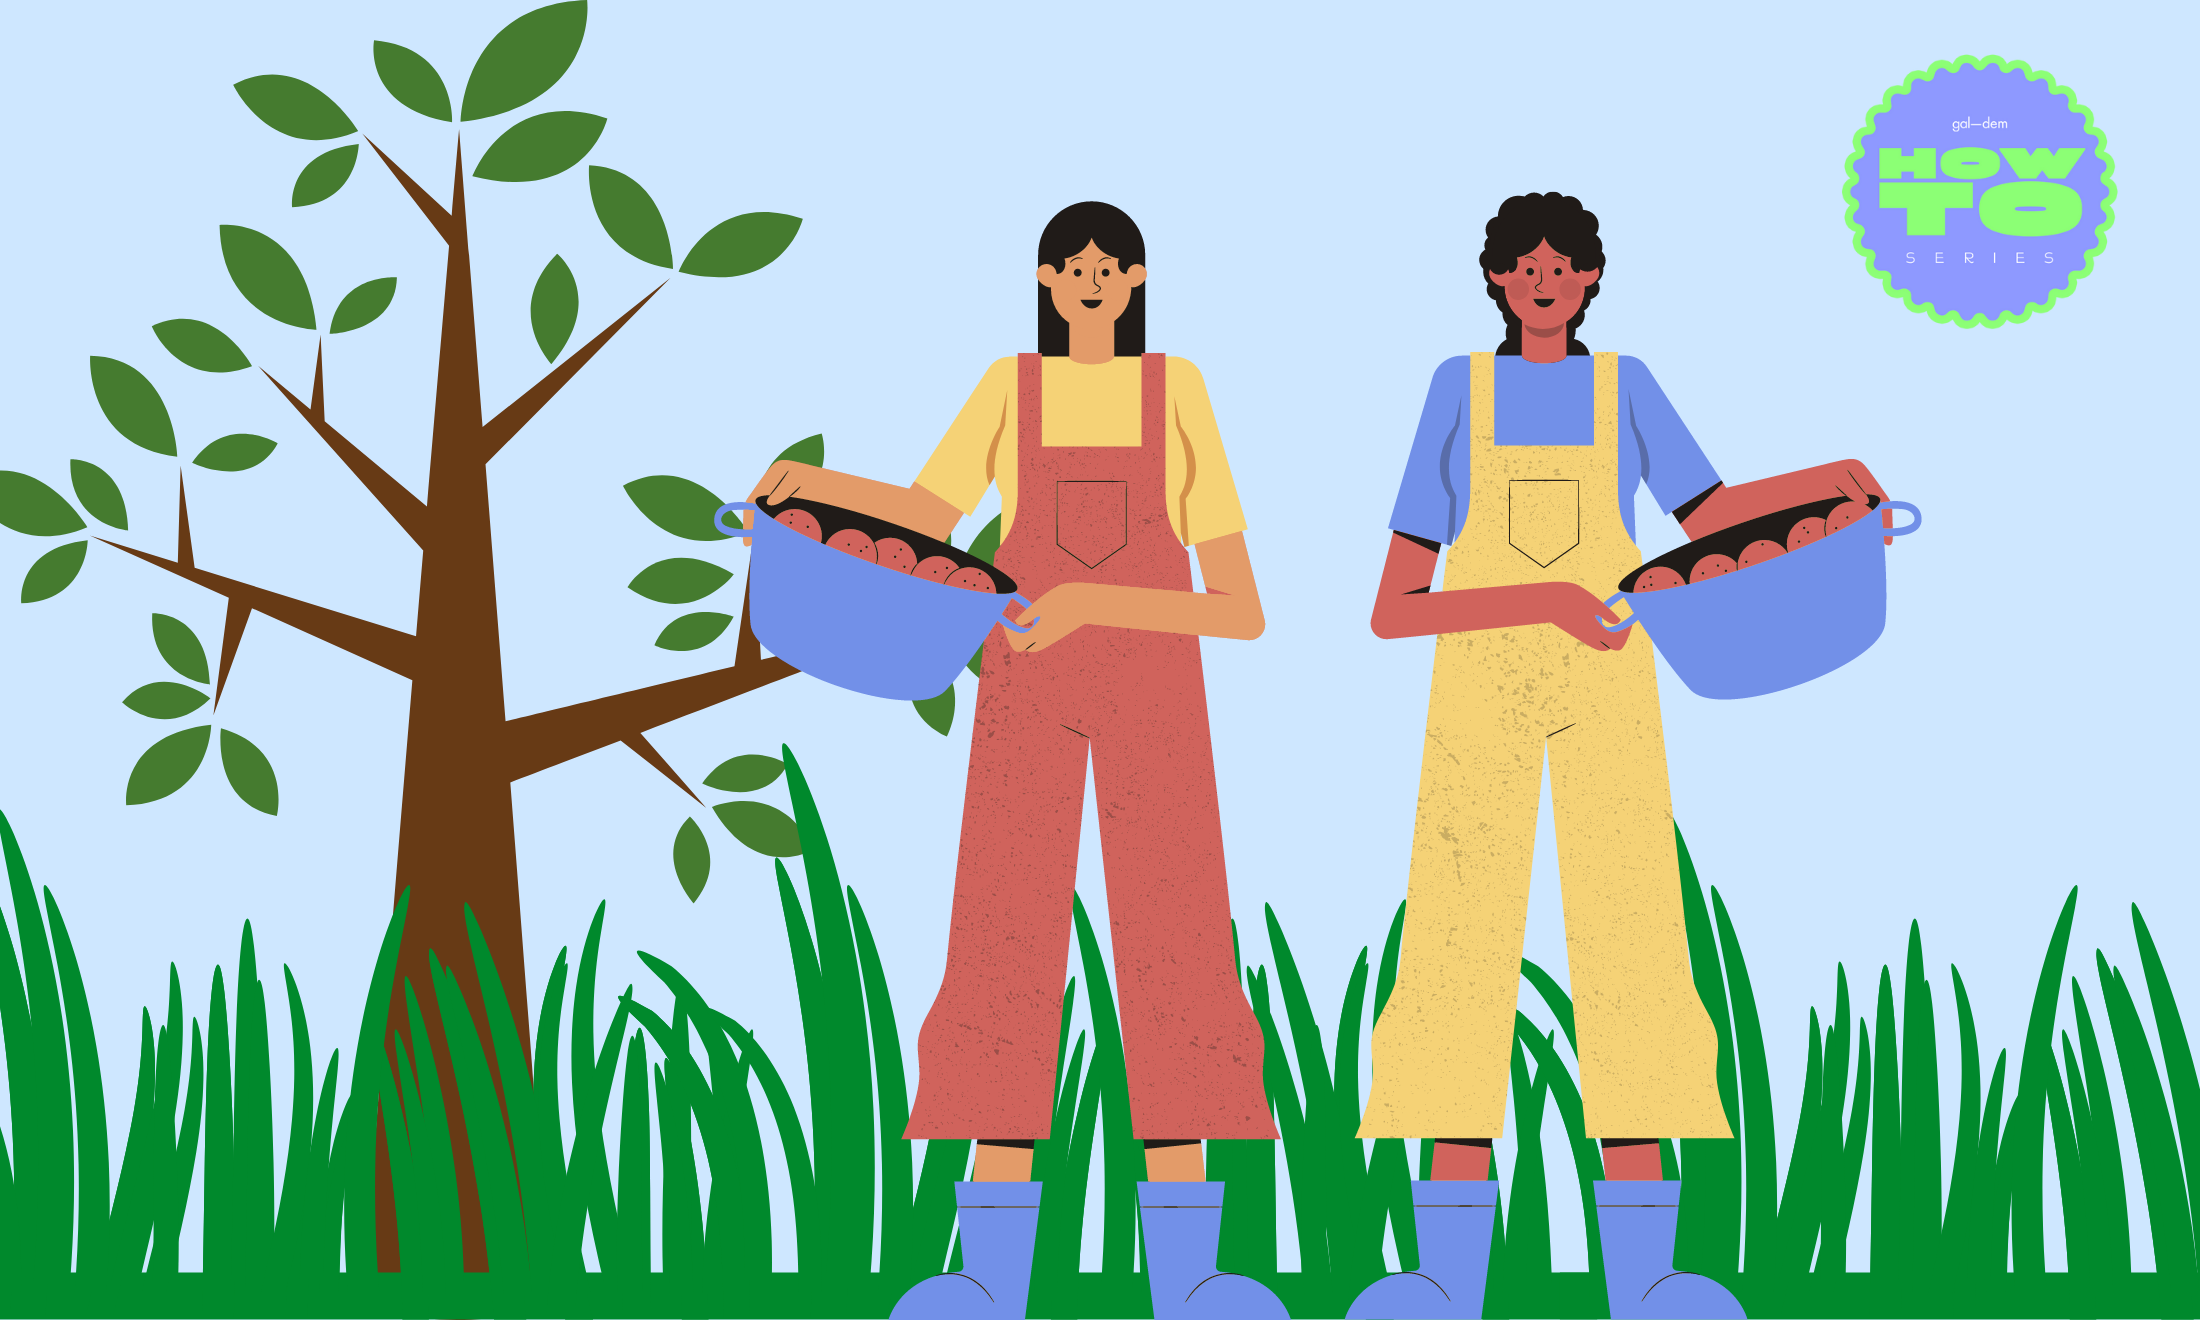 The gal-dem guide to starting a community garden